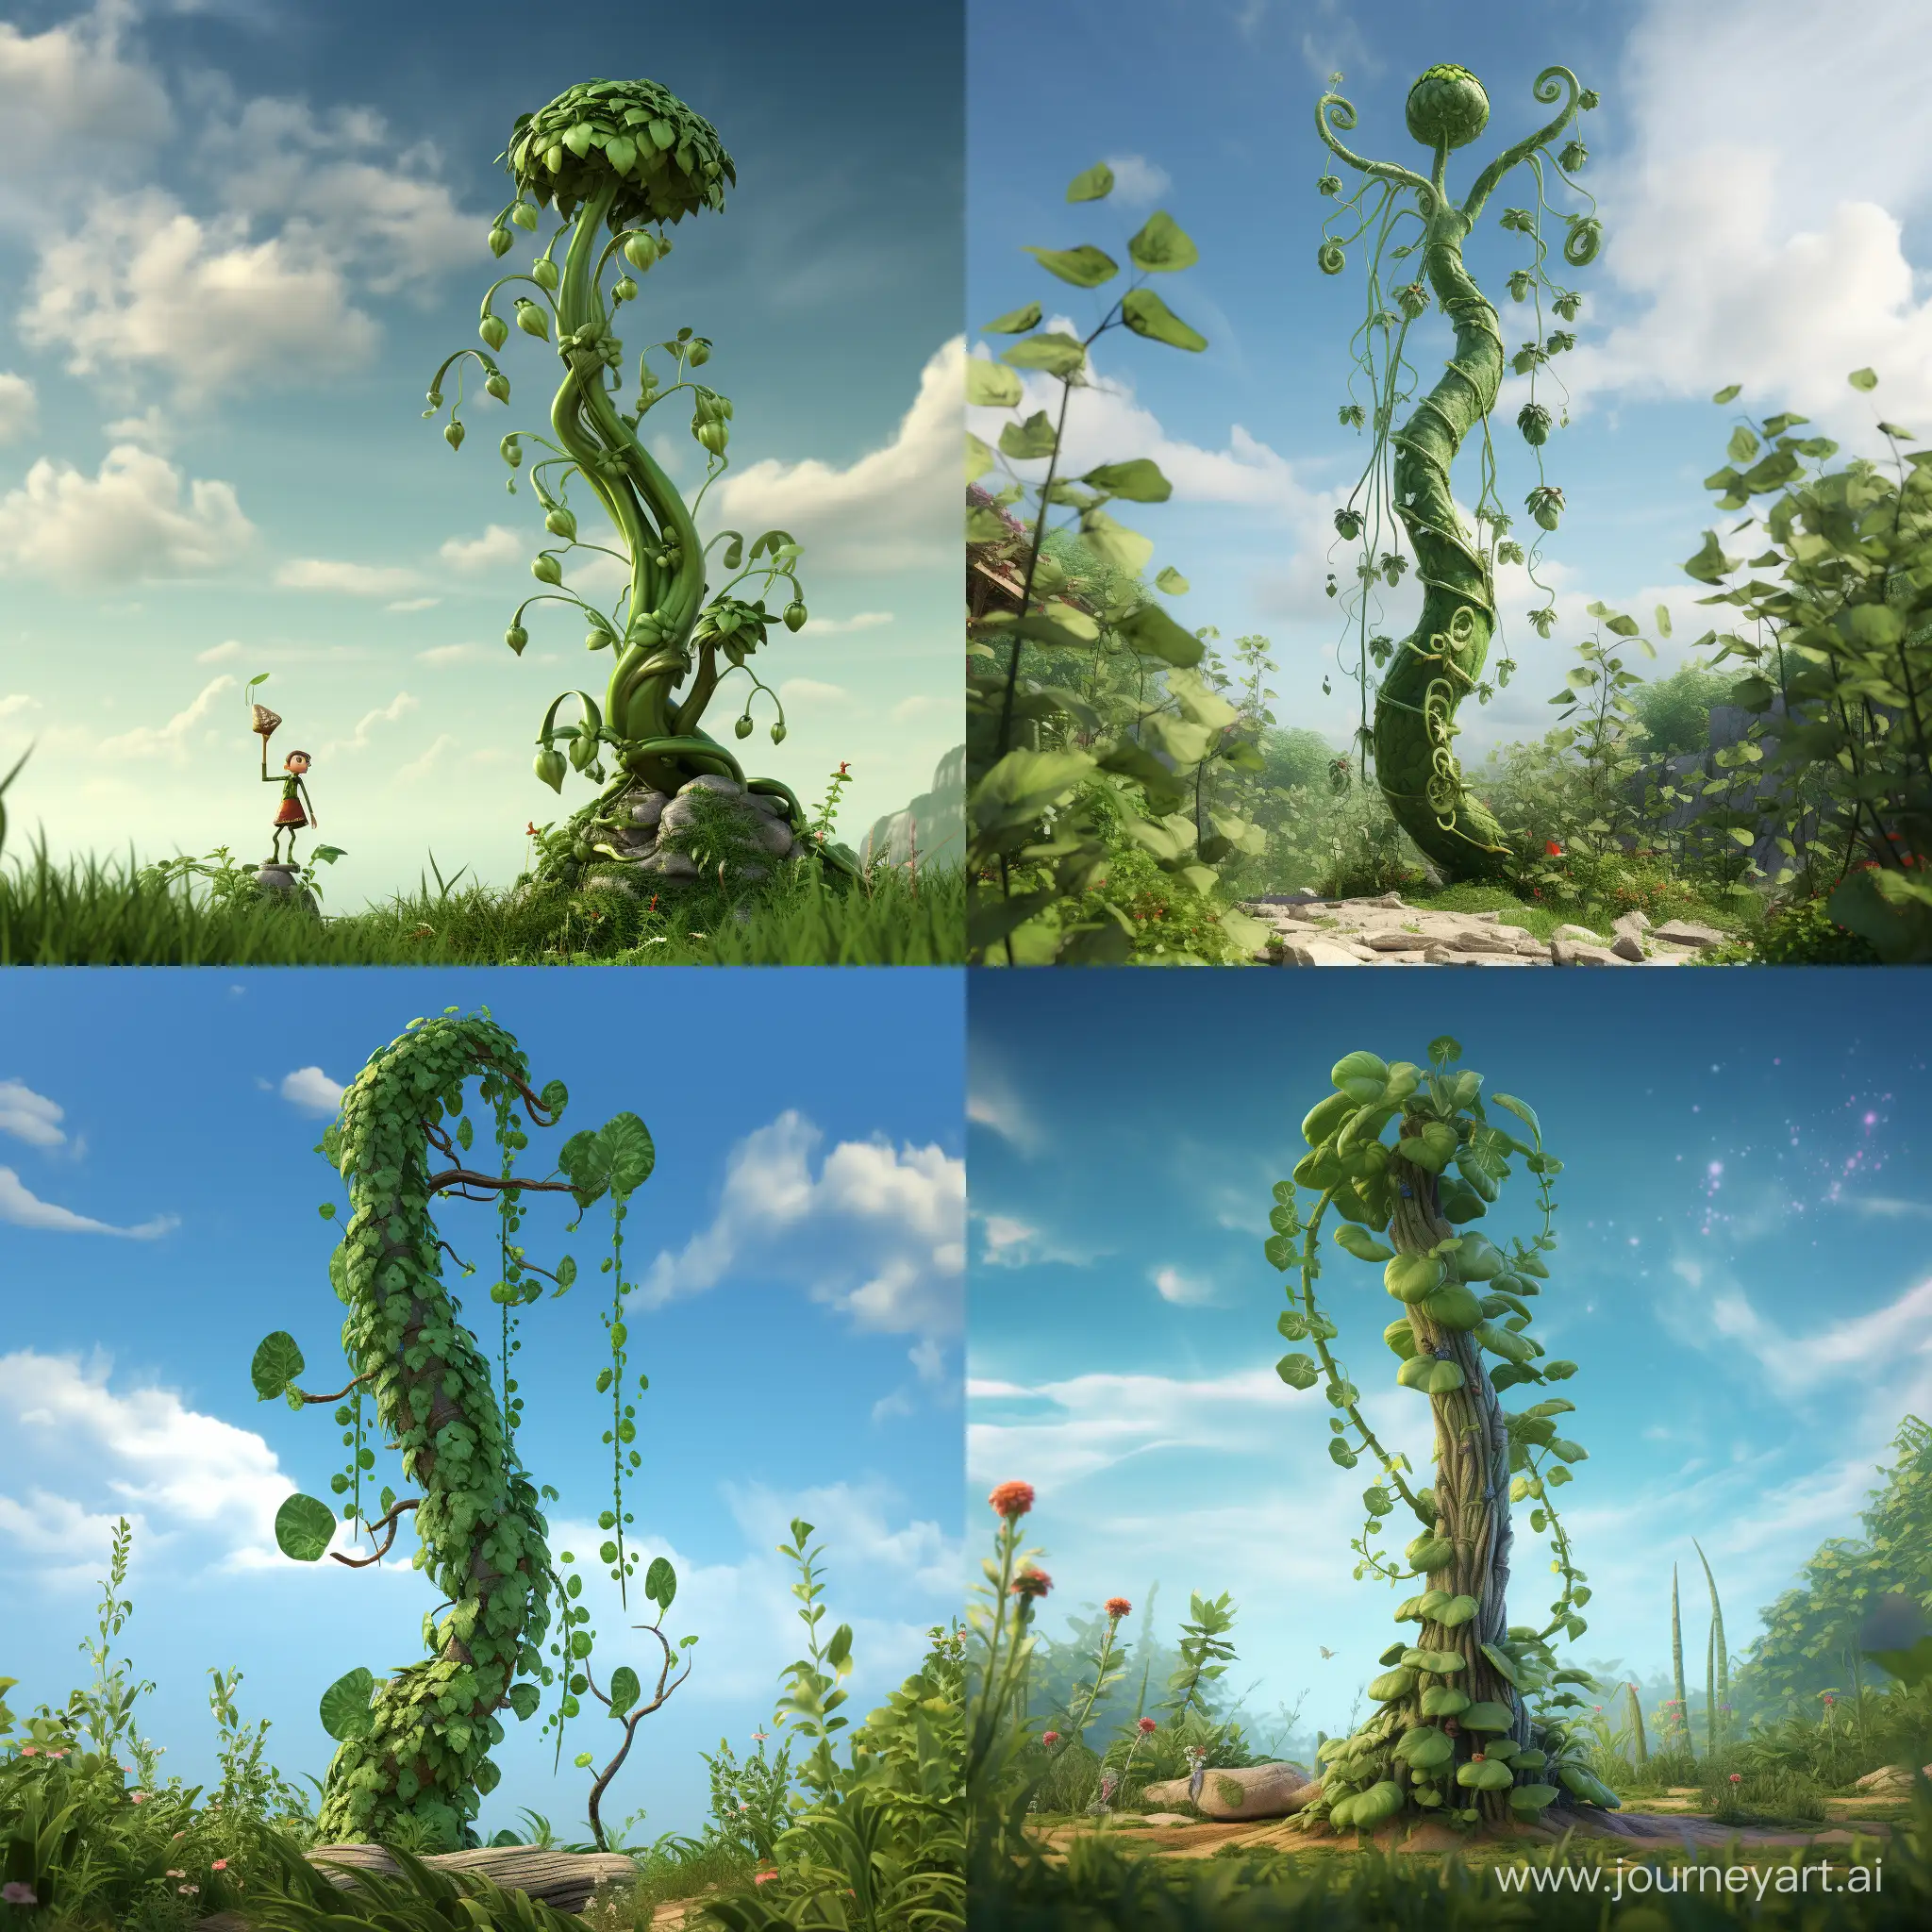 Majestic-3D-Green-Beanstalk-in-a-Square-Frame